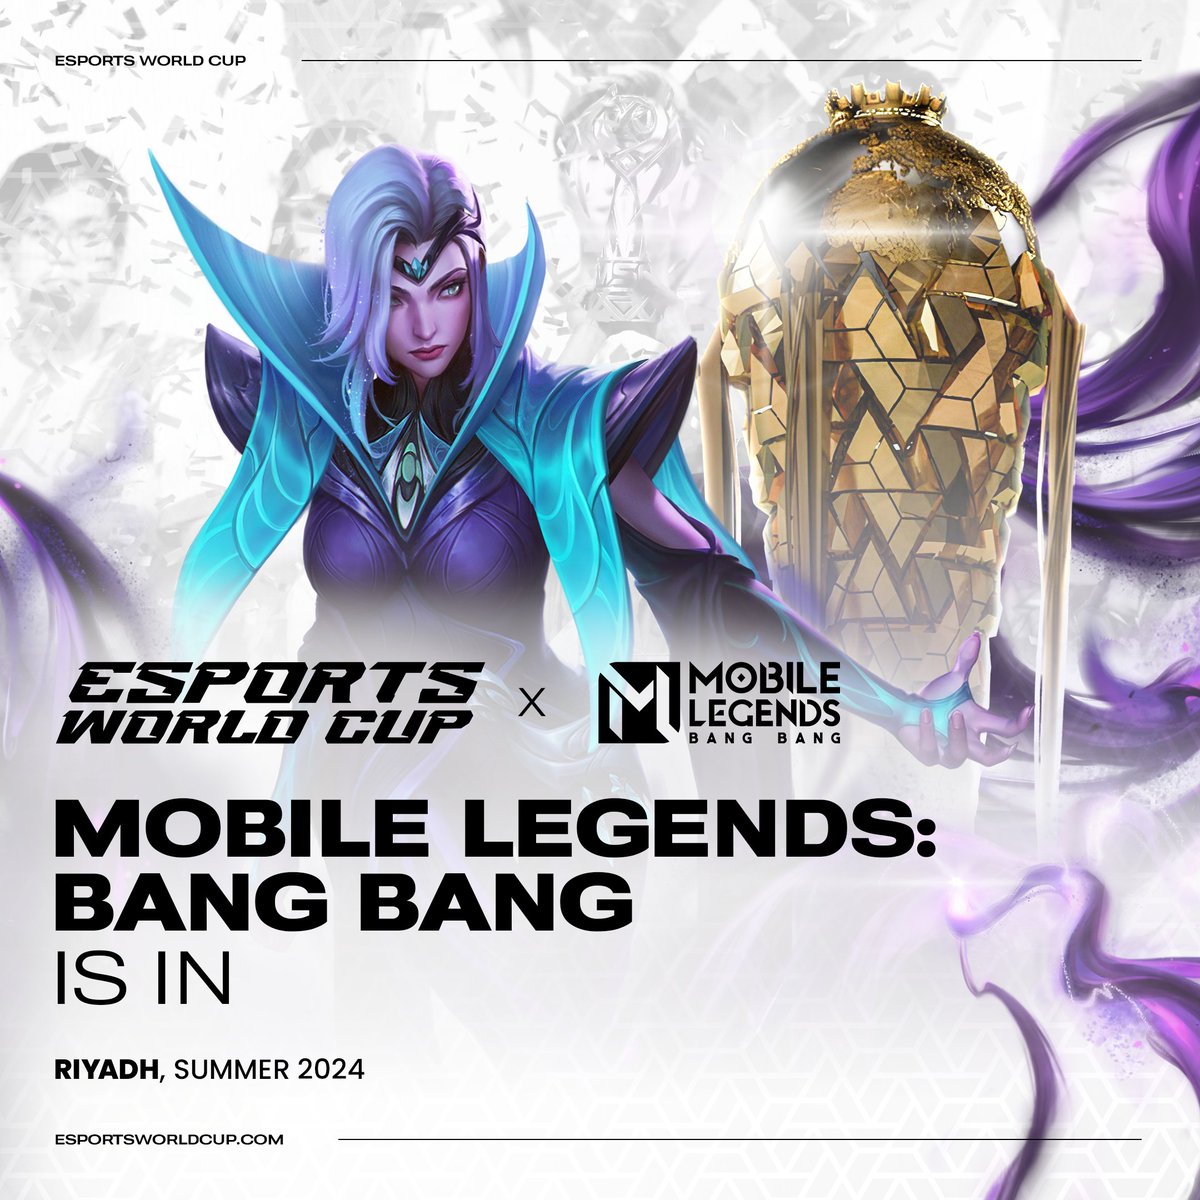 We have all been waiting for this moment…
Mobile Legends: Bang Bang is stepping onto the Esports World Cup stage!

#EsportsWorldCup #MLBBEsports #MSC2024 #MSC #MLBB #MWI2024 #MWI #MobileLegendsBangBang #Esports